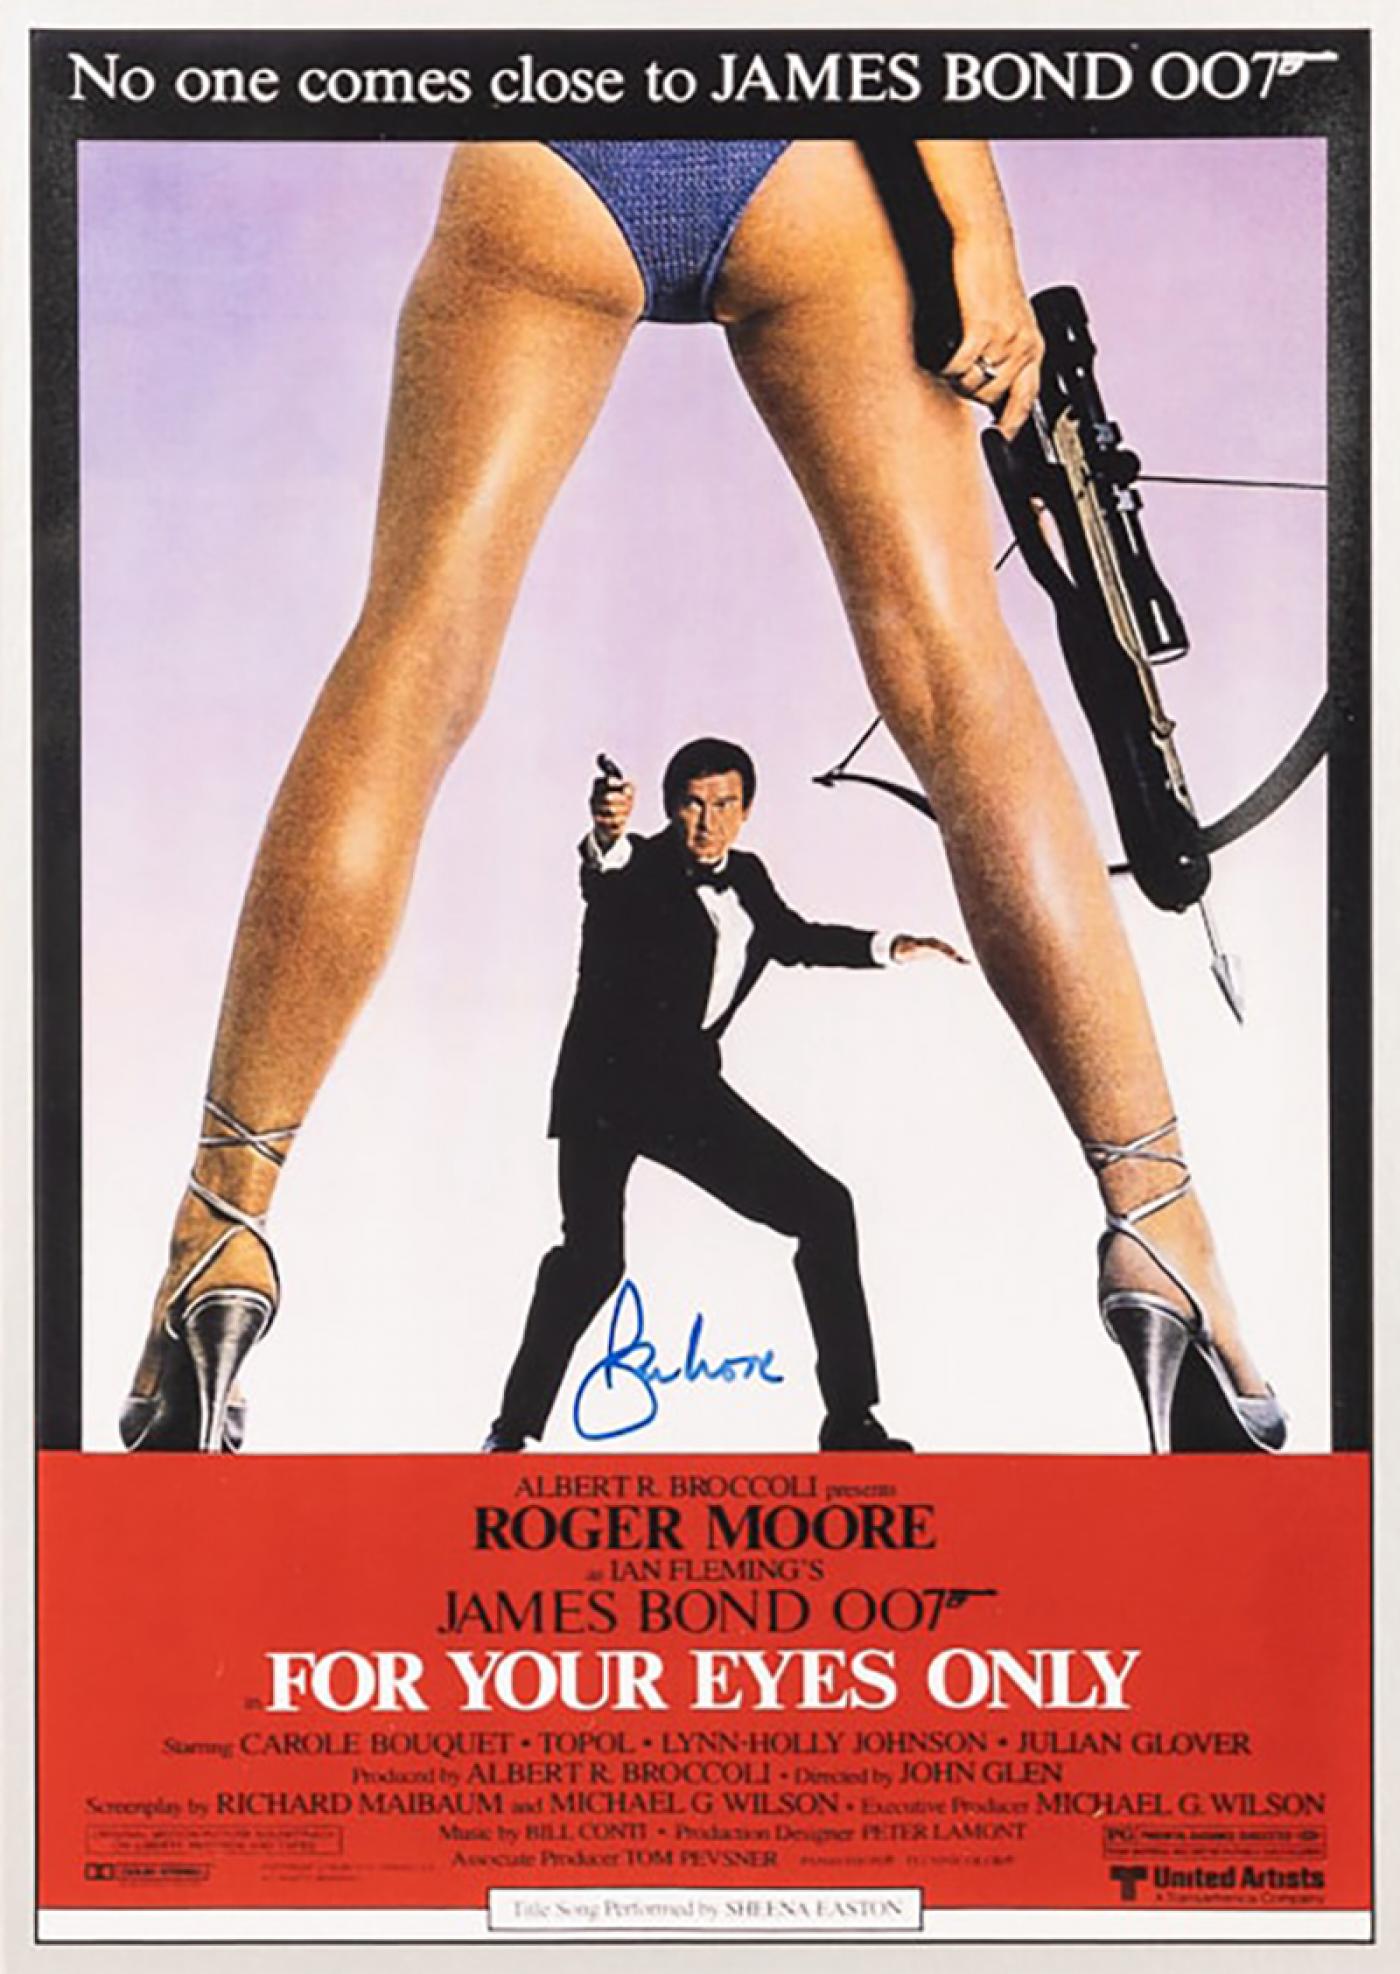 James Bond 007 'For Your Eyes Only' Poster, Signed By Roger Moore